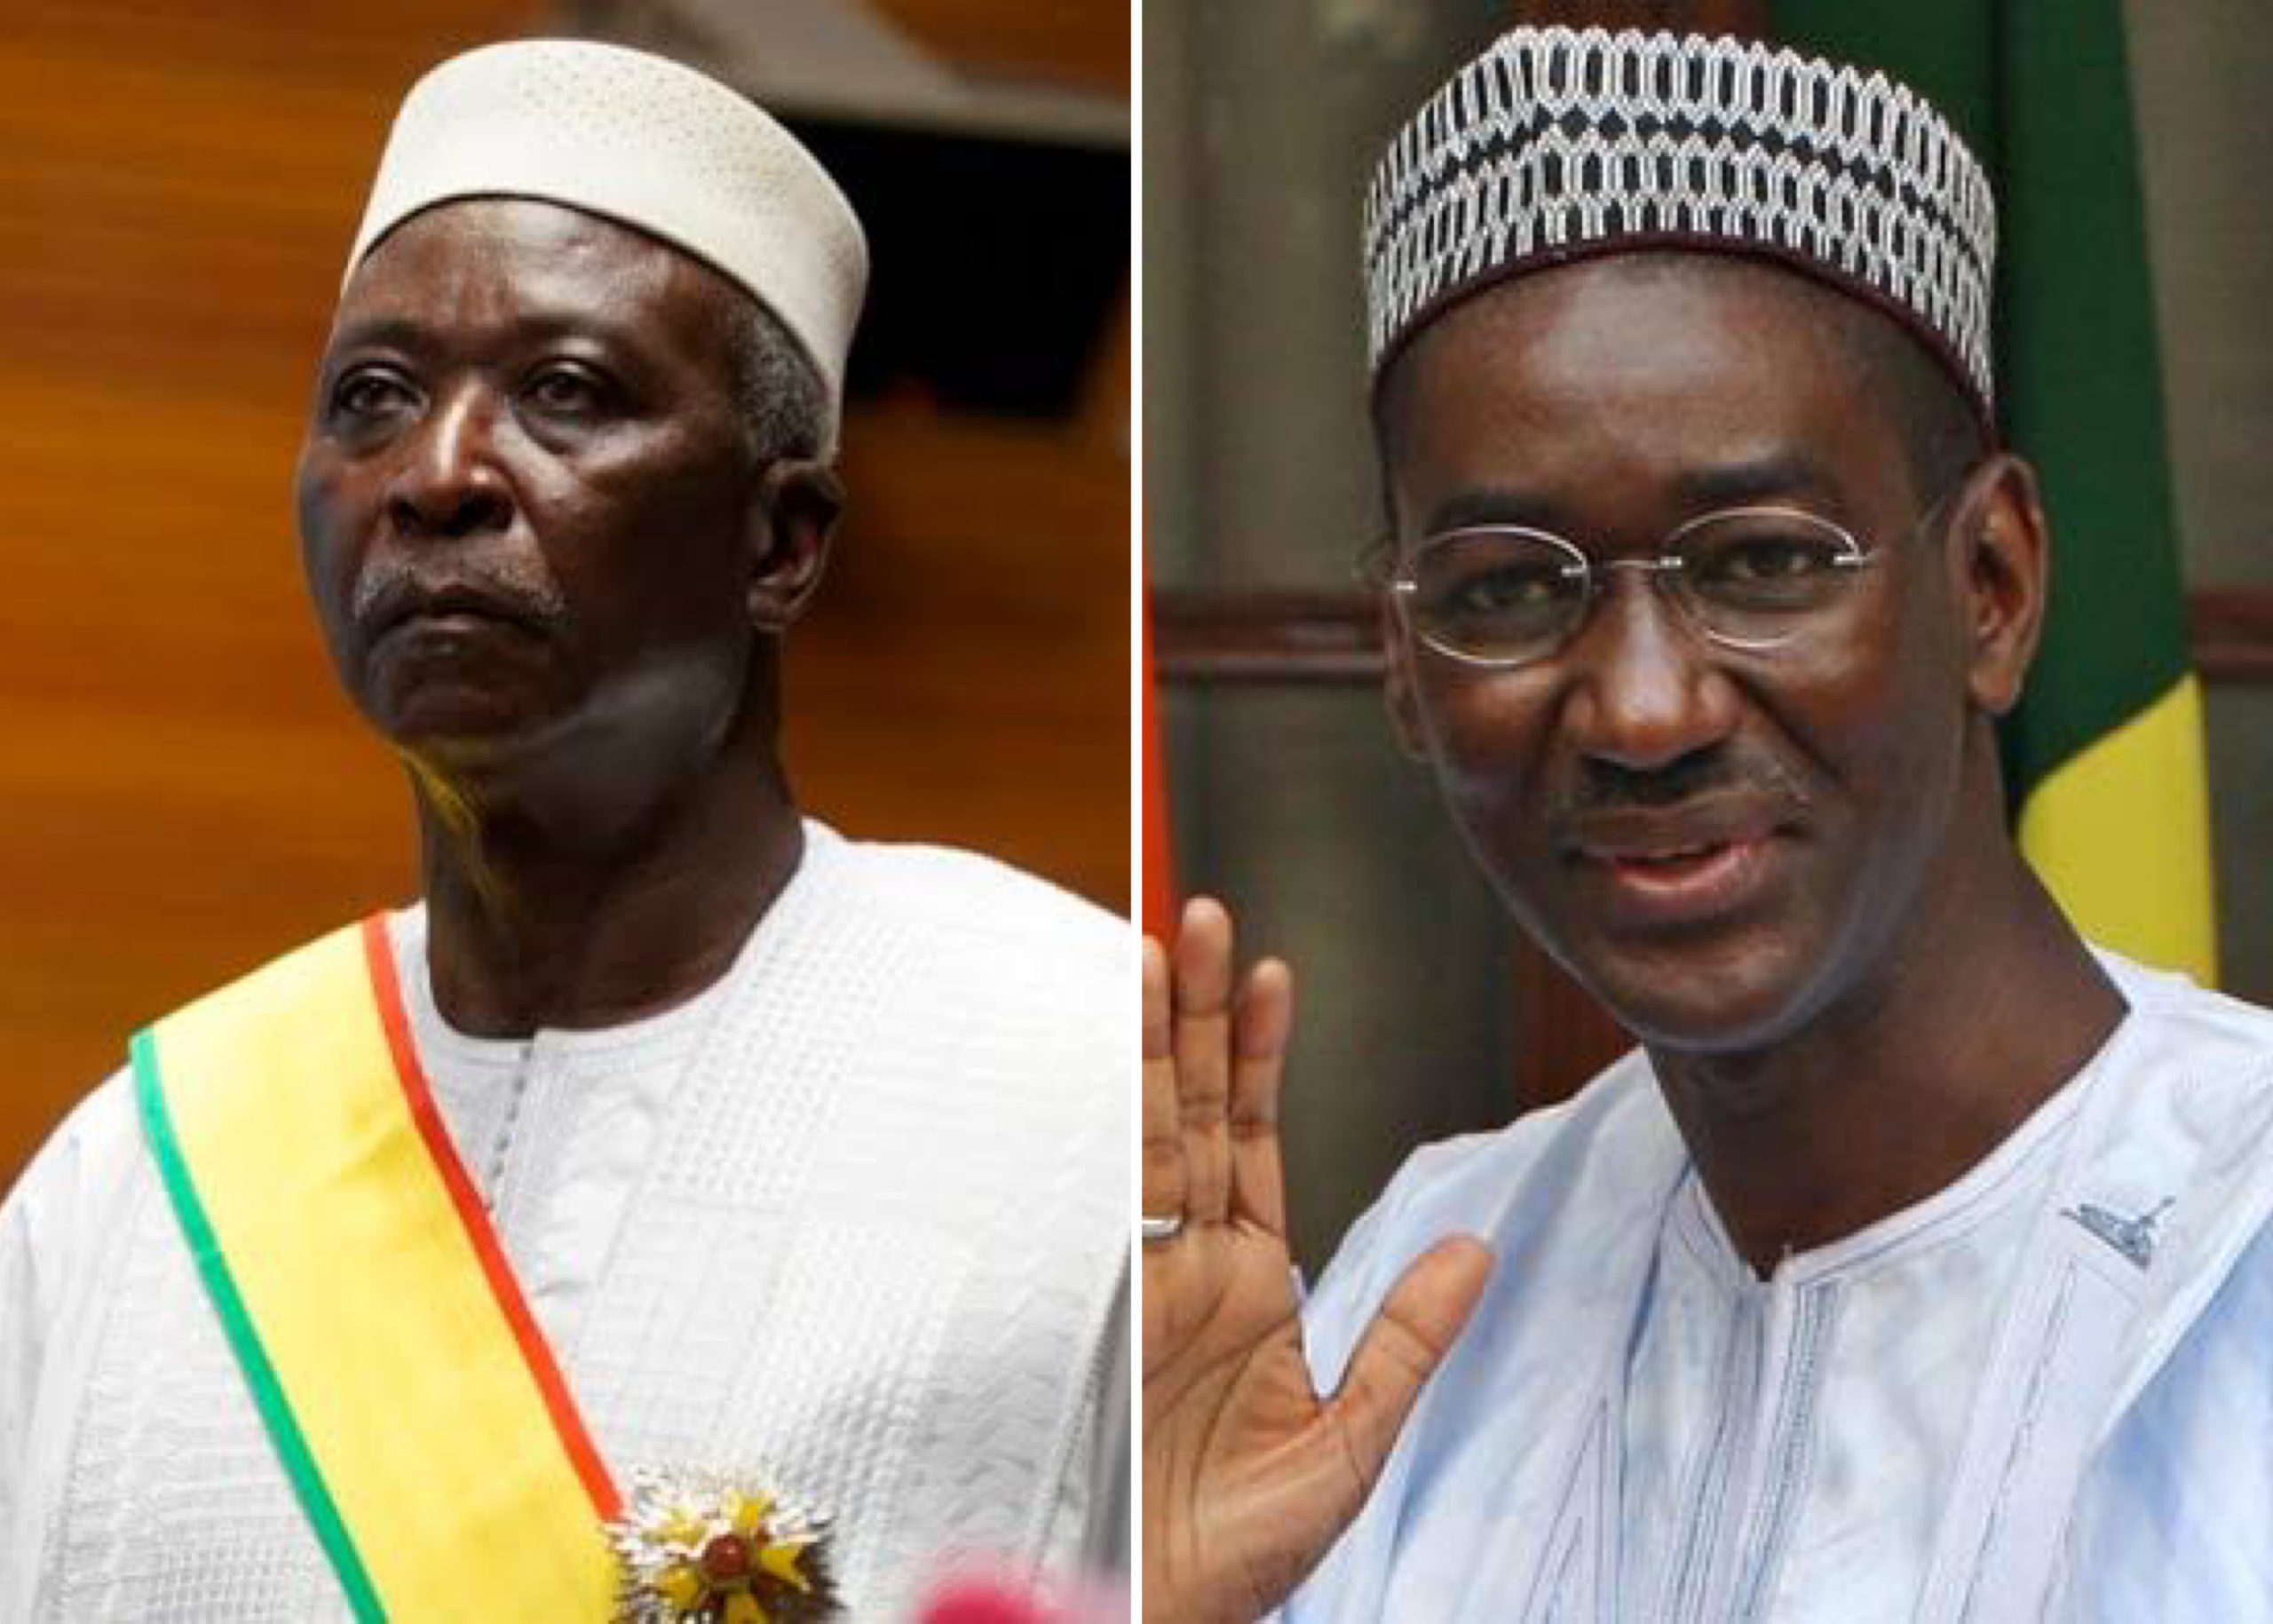 Mali's President, Prime Minister Arrested In 2nd Military Coup ​Resign